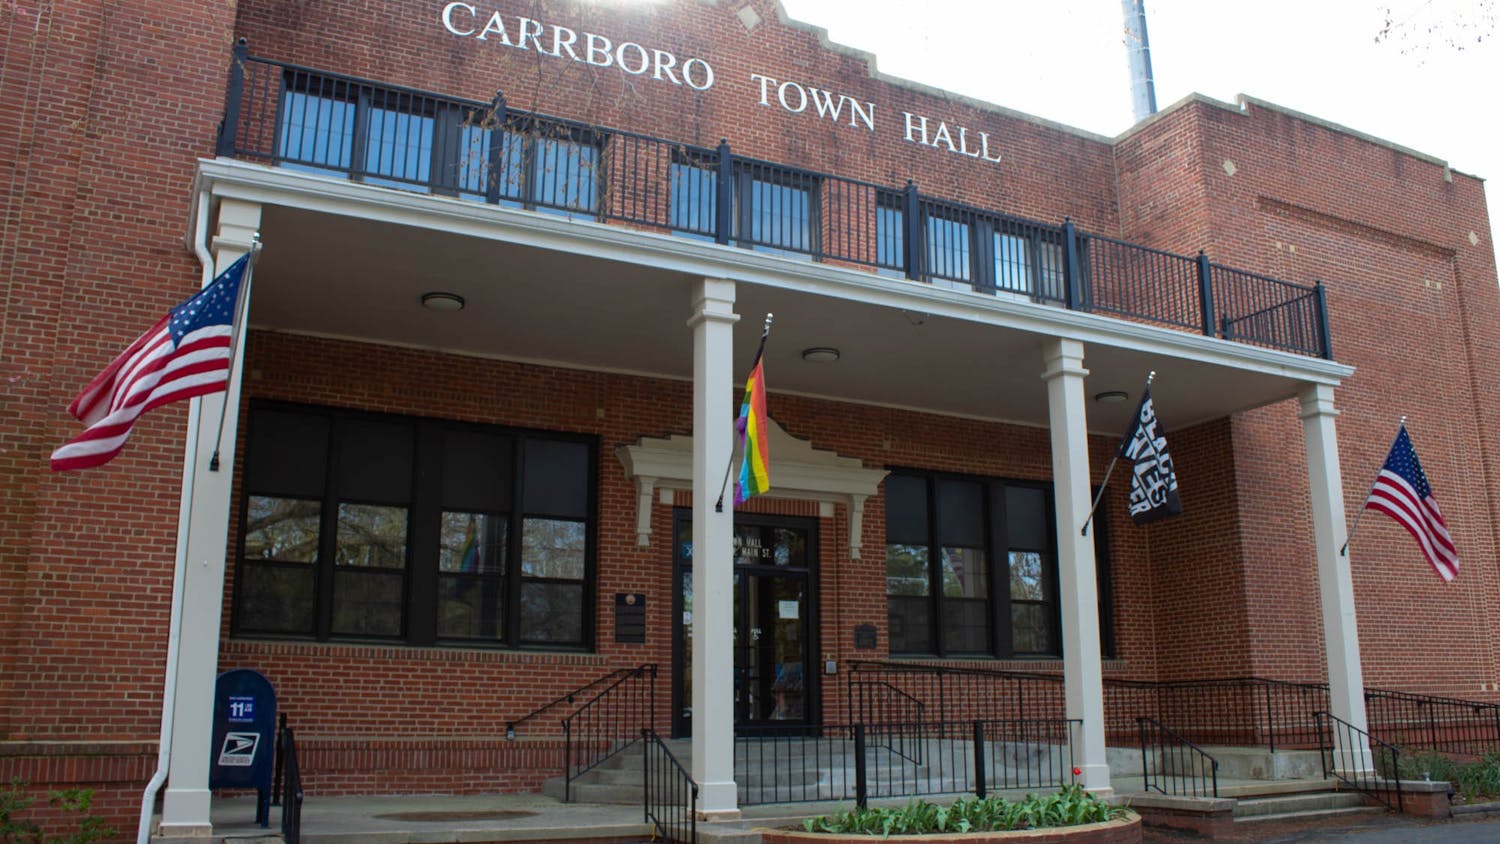 20230327_Garcia_city-carrboro-assistant-town-manager-feature-2.jpg